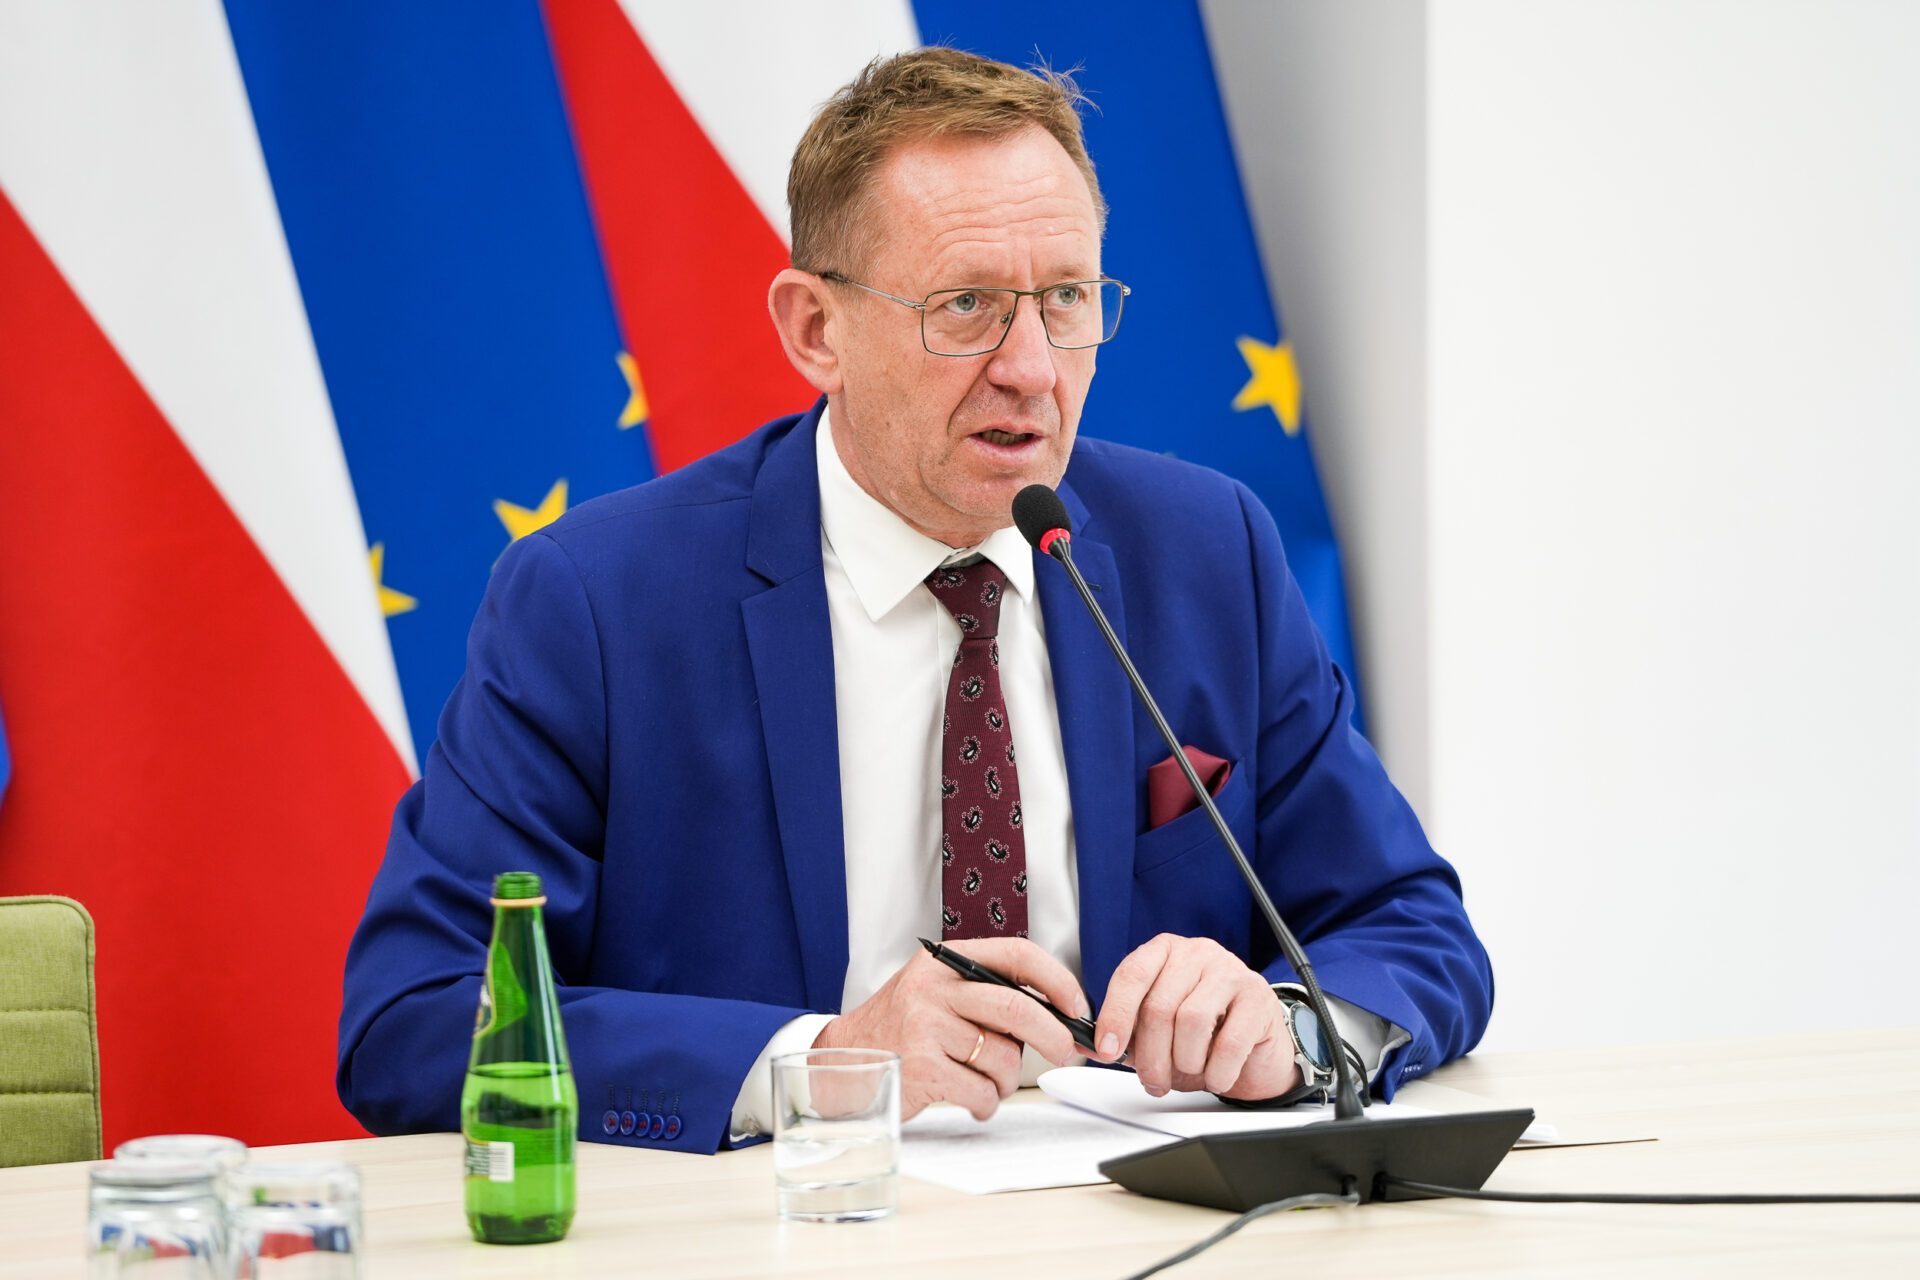 Polish Agriculture Minister Robert Telus has defended the government's aid package for farmers affected by an influx of Ukrainian grain, stating that it does not violate World Trade Organisation (WTO) regulations.